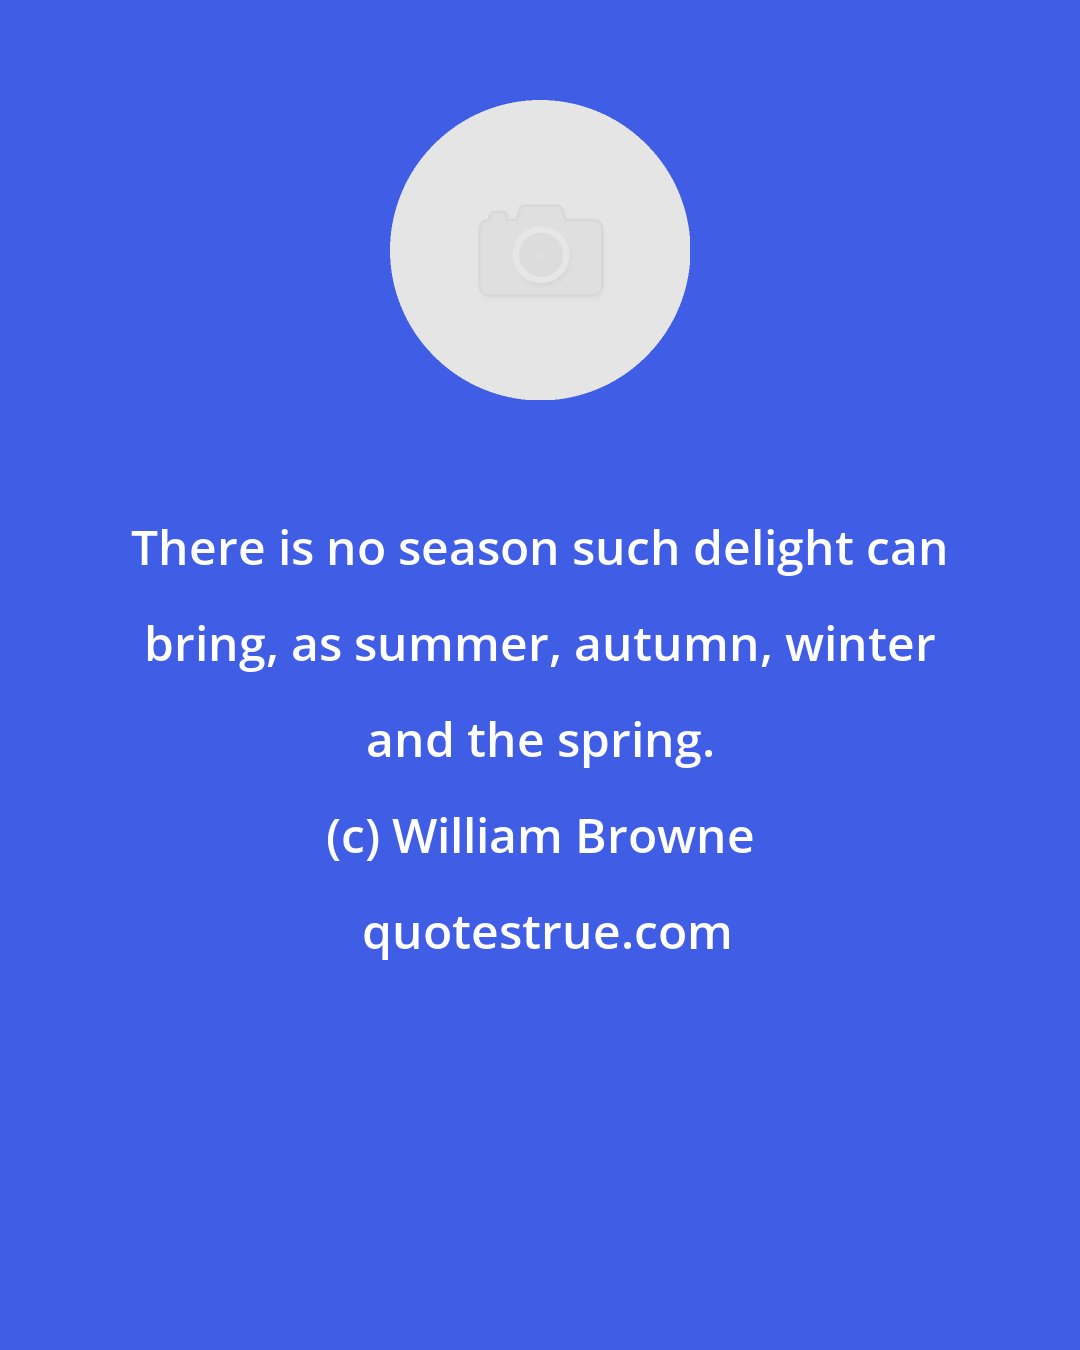 William Browne: There is no season such delight can bring, as summer, autumn, winter and the spring.